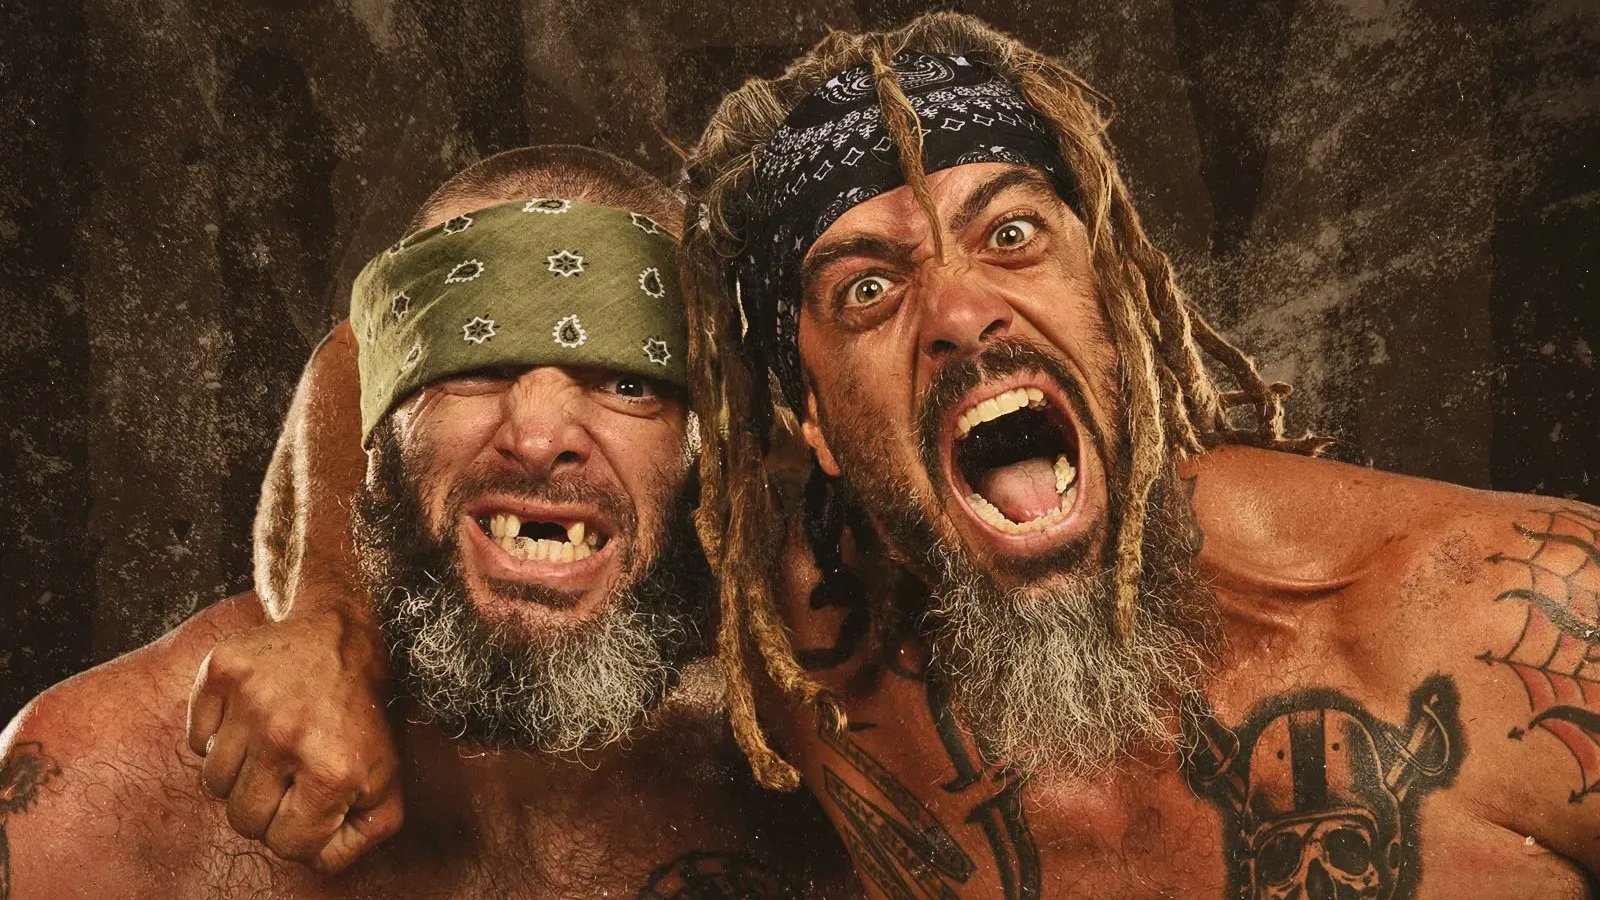 Confirmation of Parker Boudreaux’s AEW Status and Mark Briscoe’s Desire to Retire Following Jay’s Death